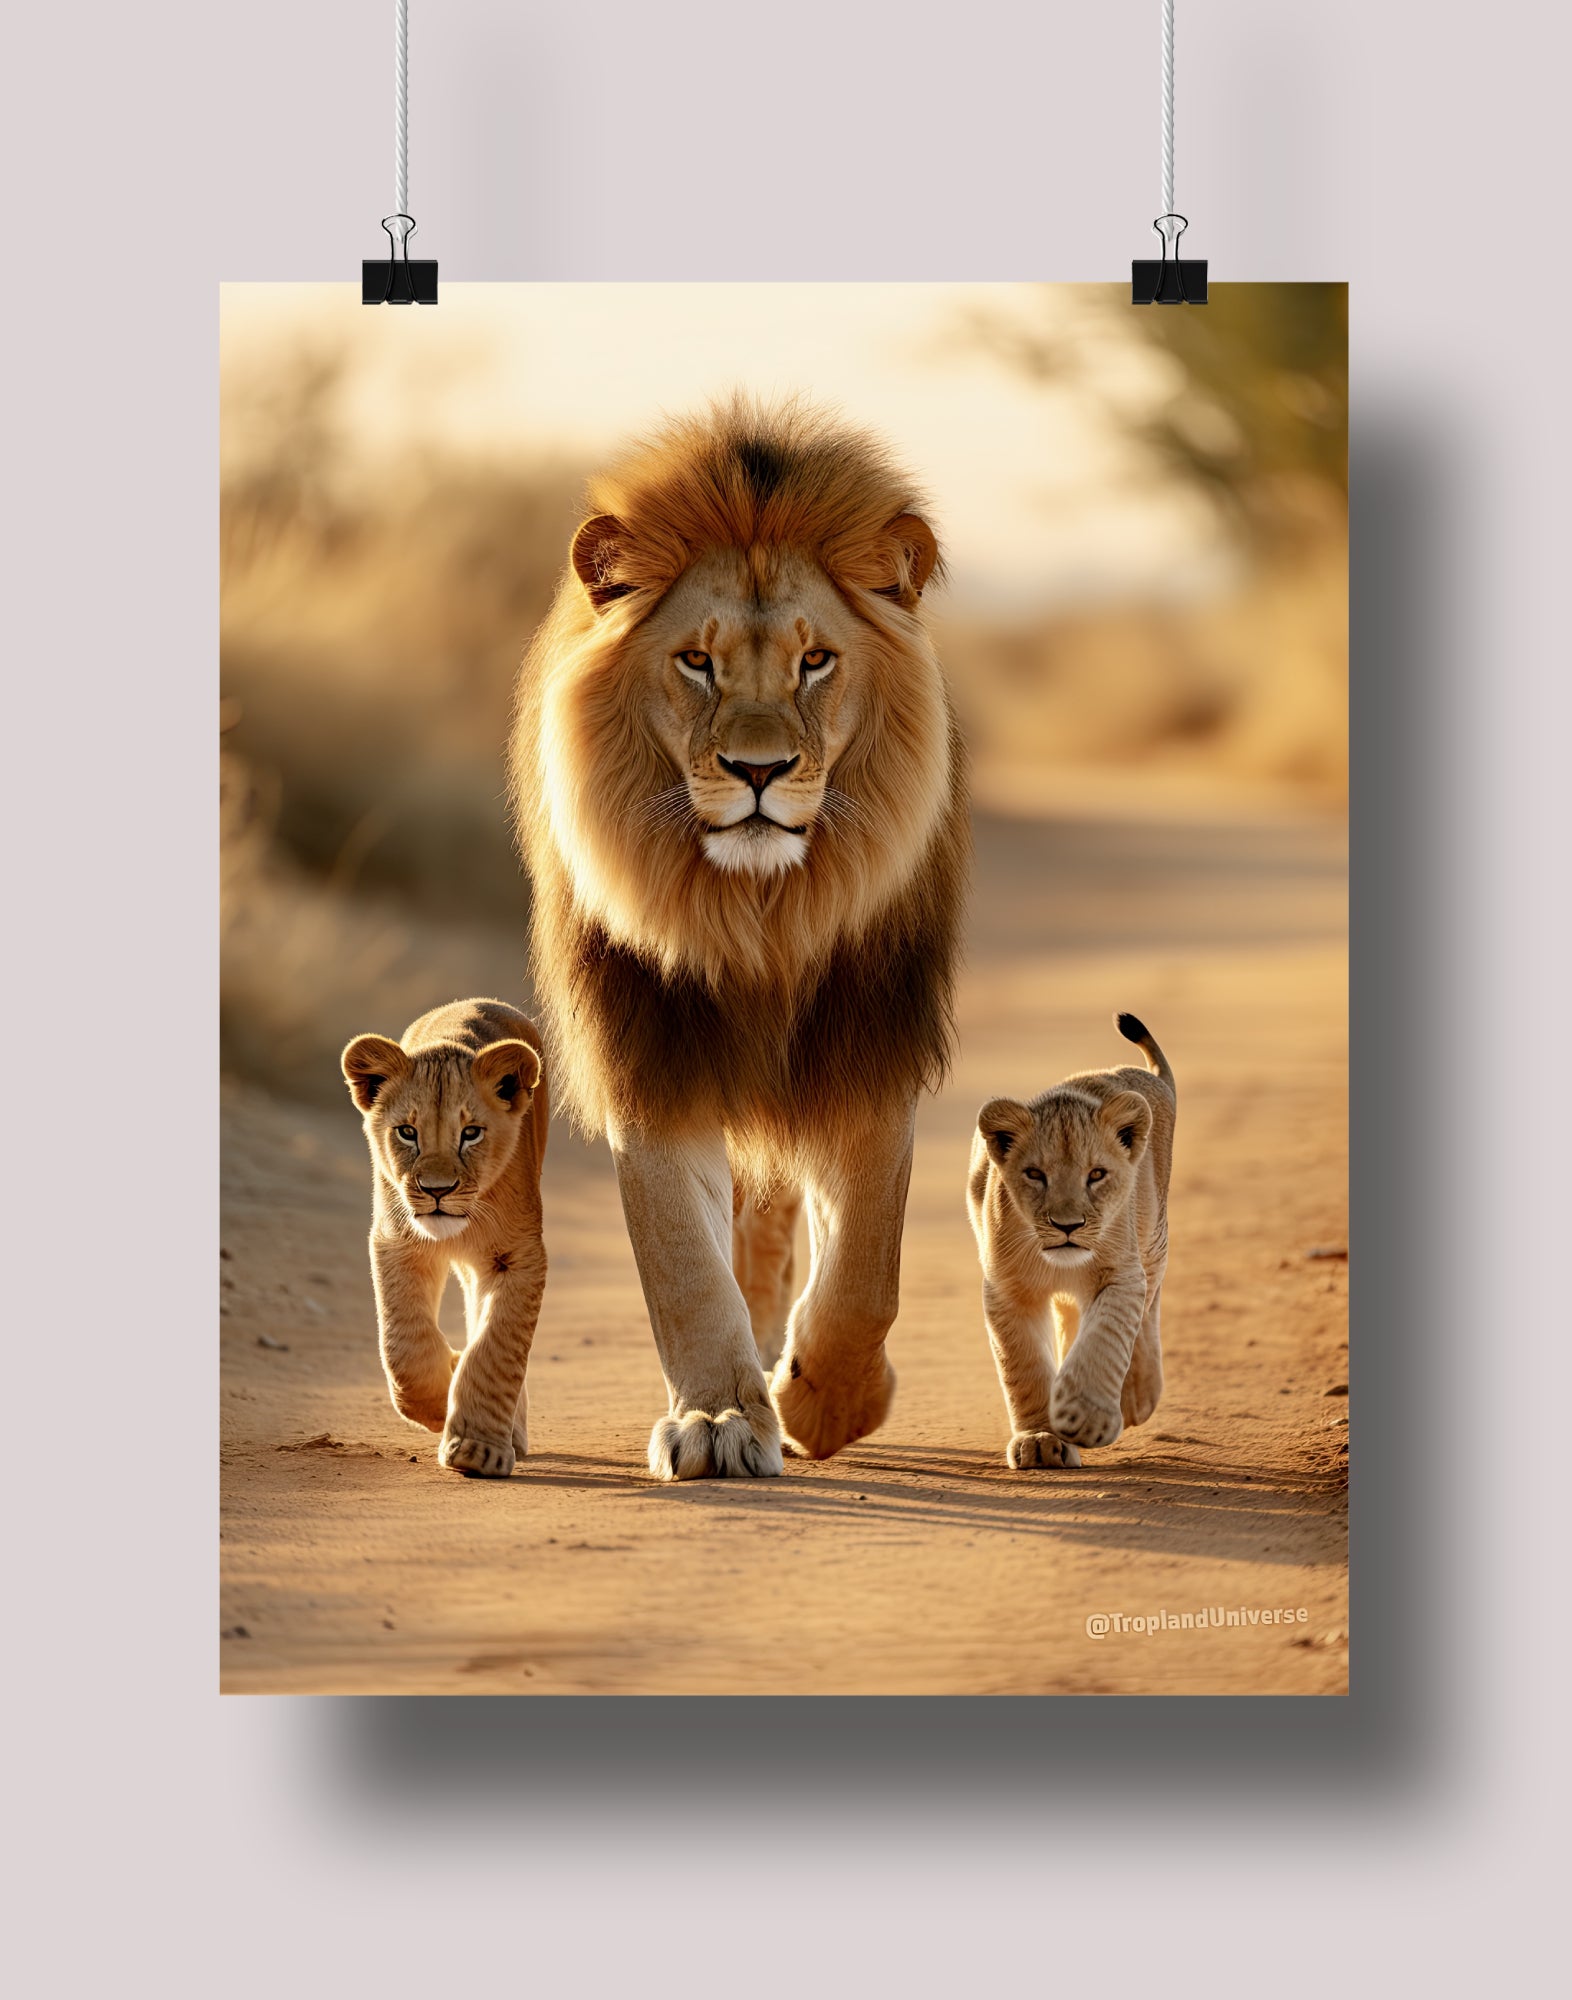 The Lion Family: Museum-Grade Poster - Tropland Universe